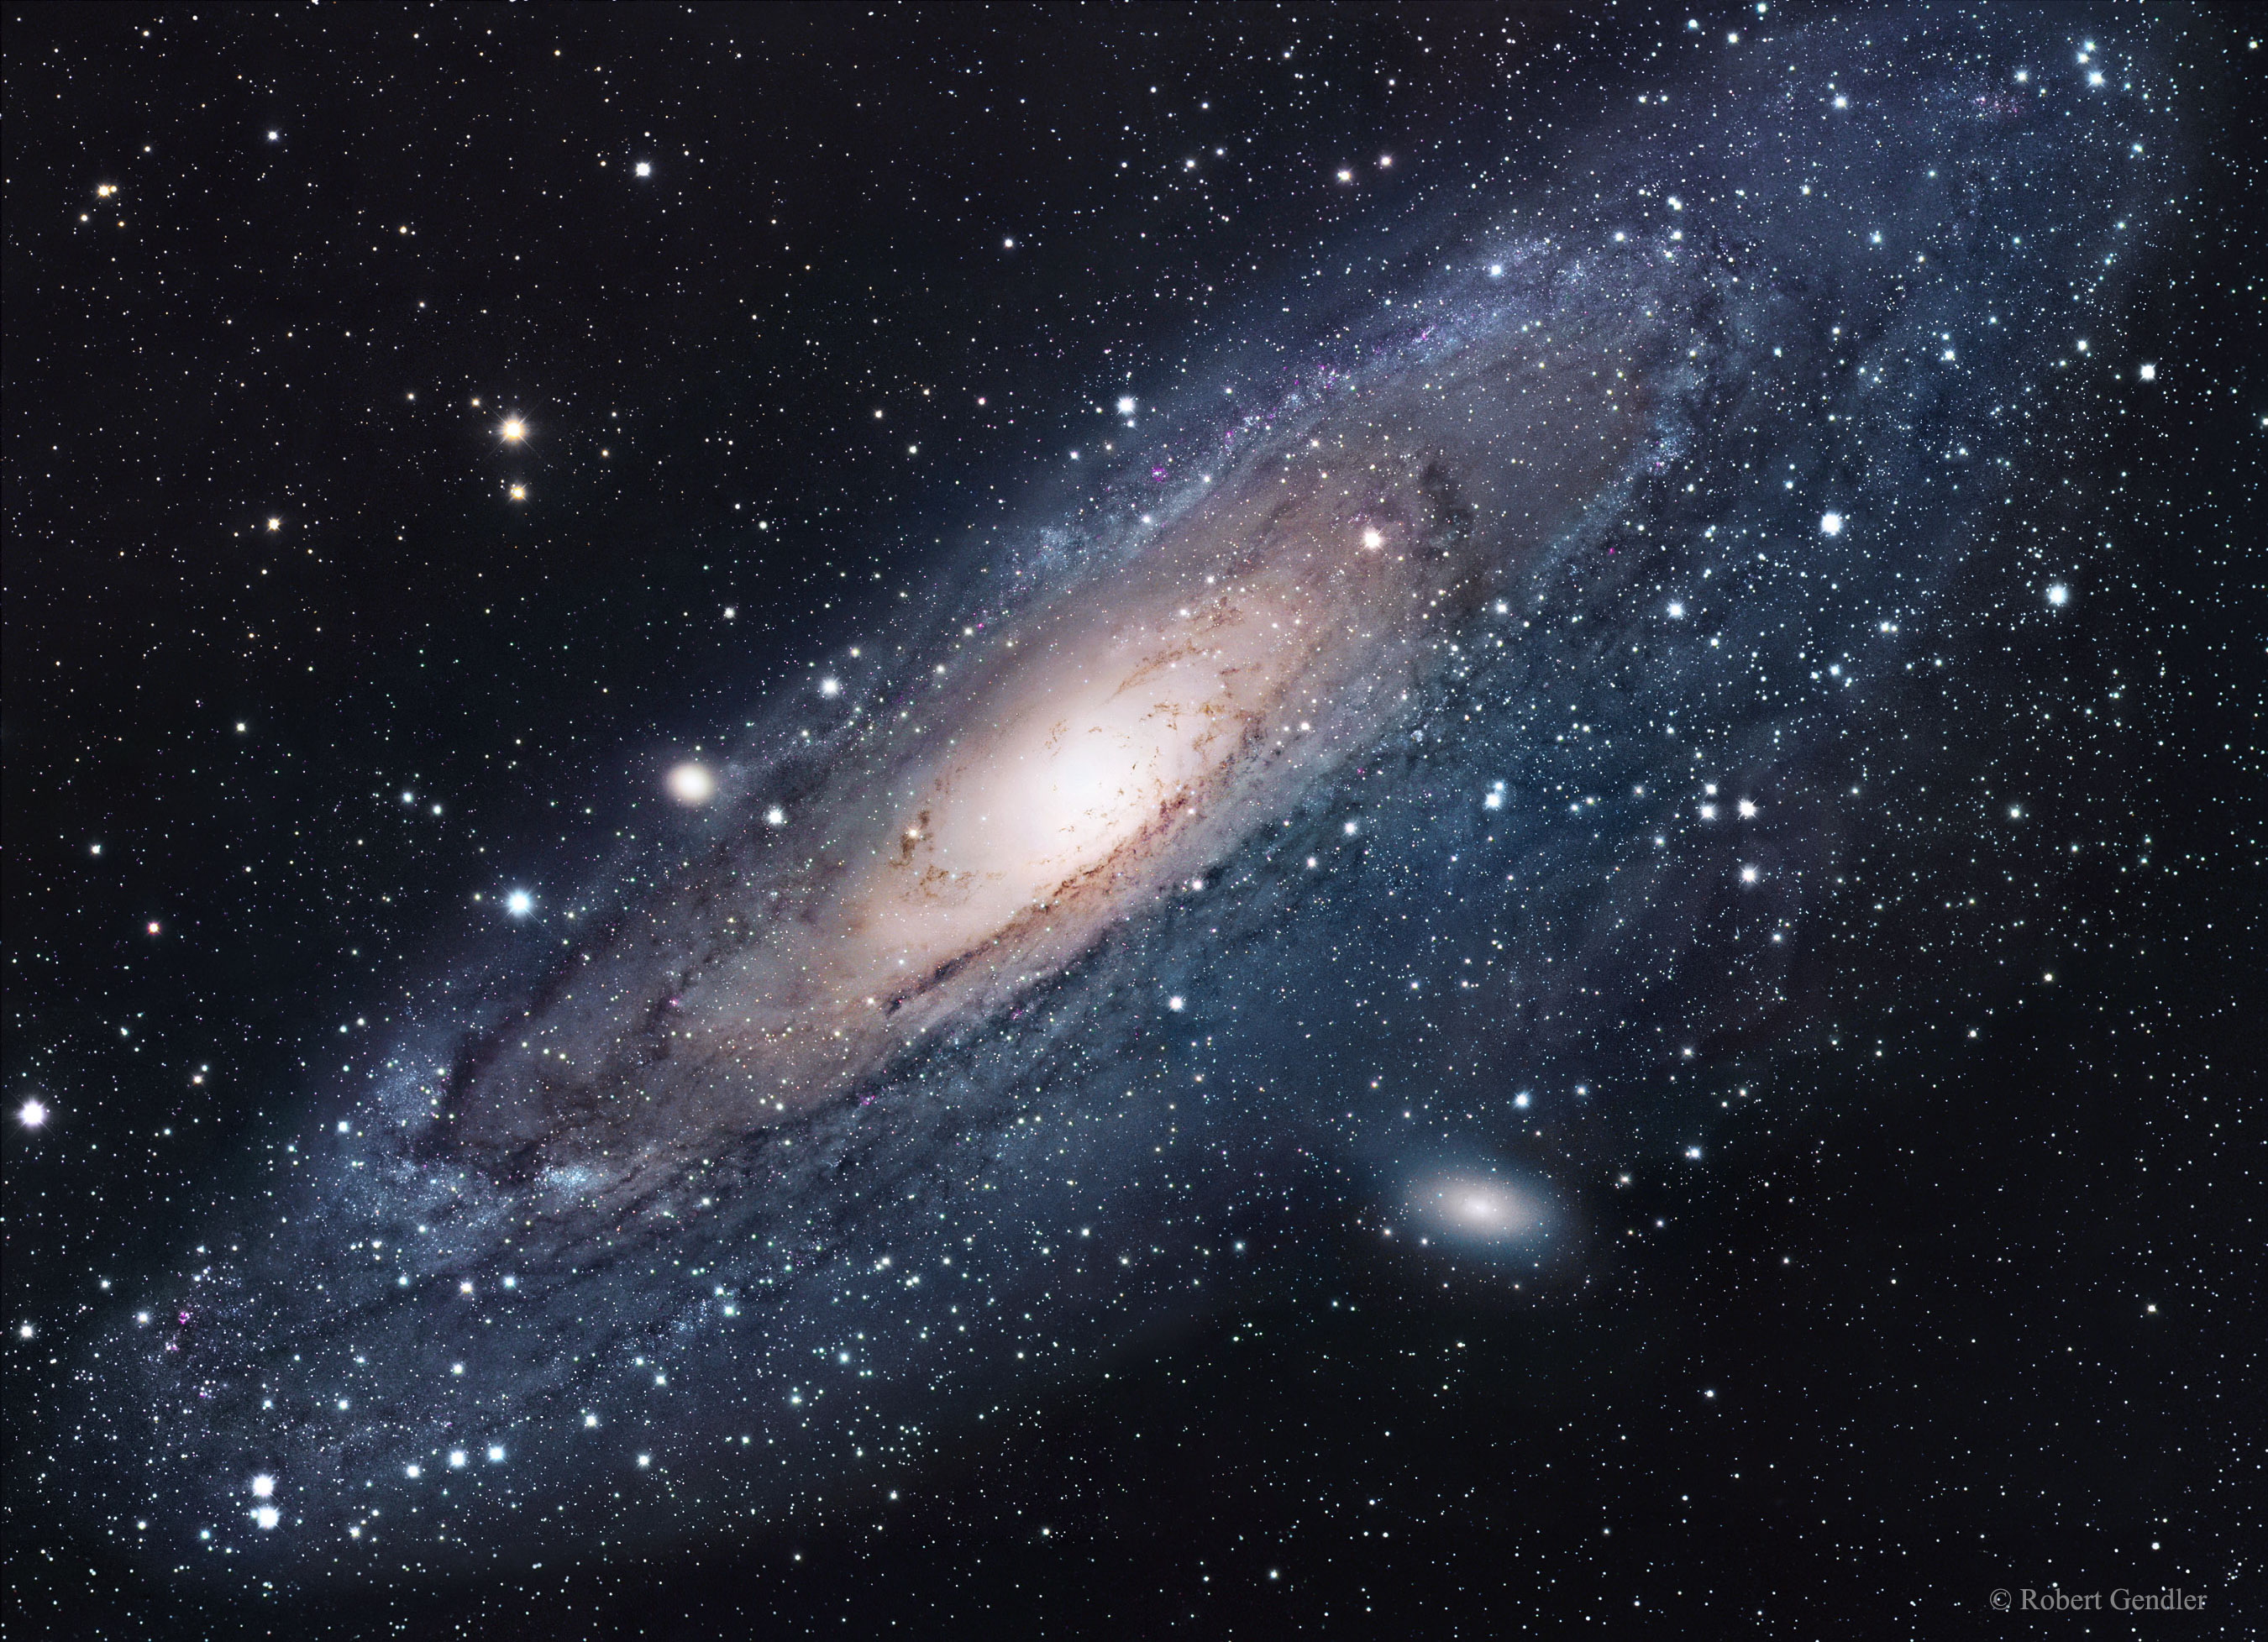 APOD: 2015 August 30 - M31: The Andromeda Galaxy